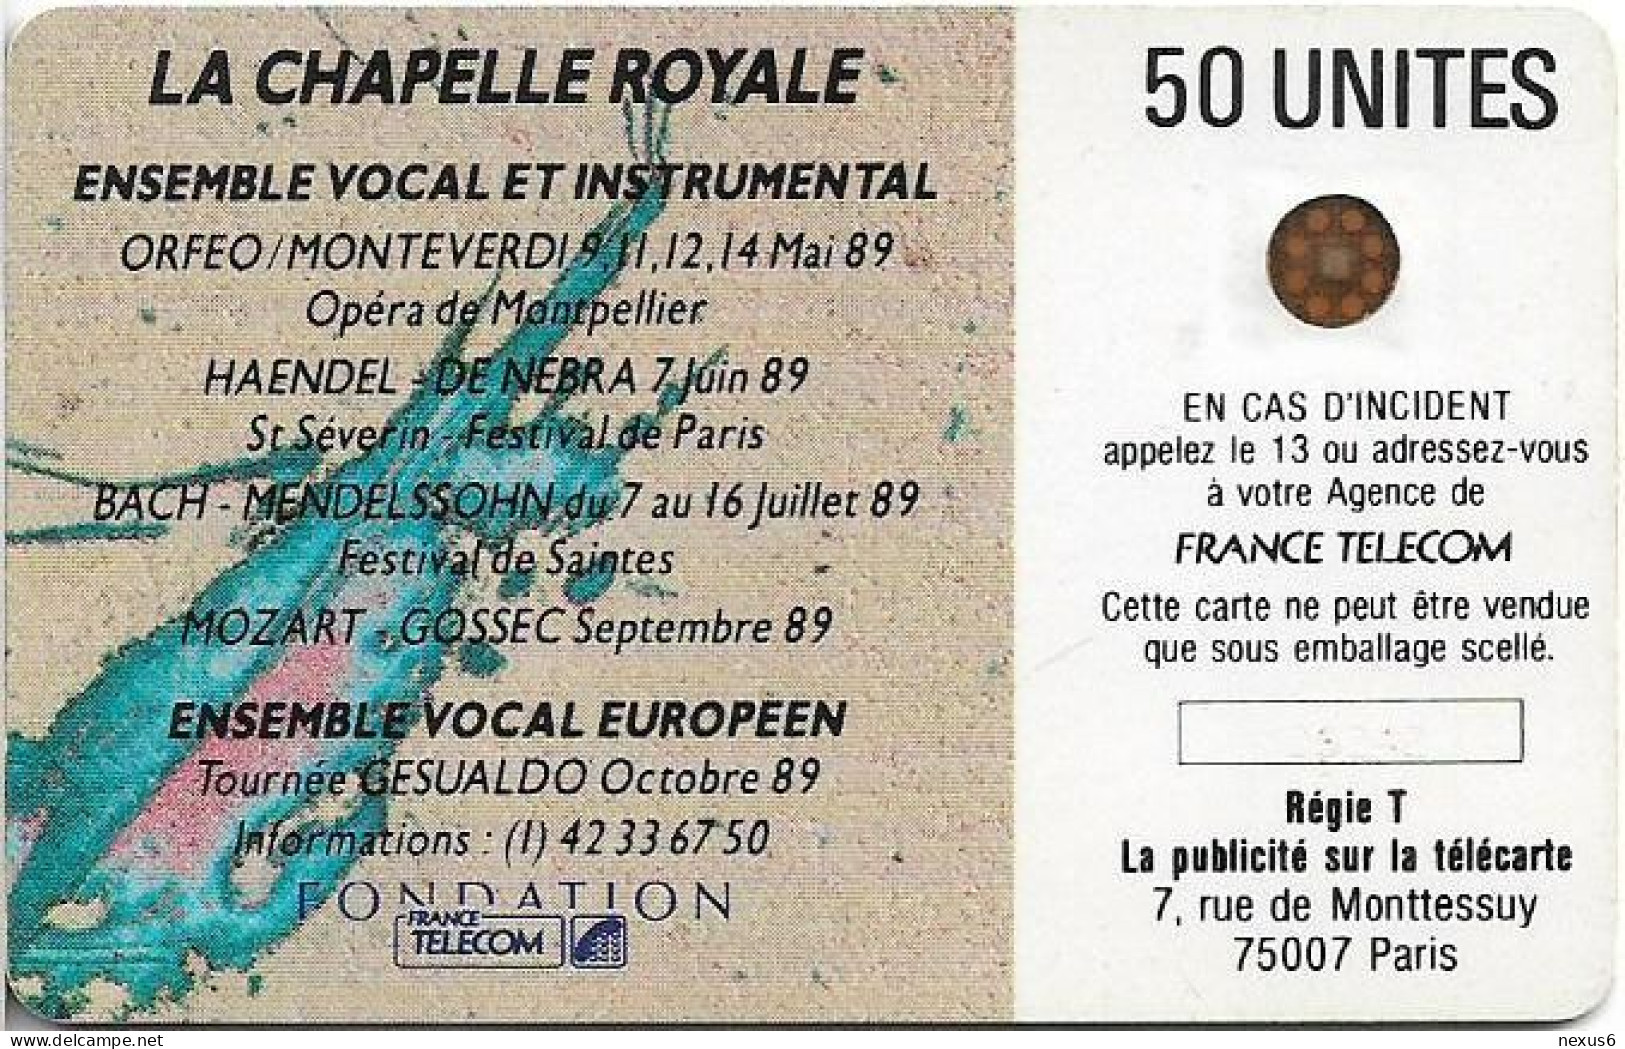 France - 0077A - Chapelle Royale 3 (texte Fin), SC5 GB, Cn. 106242, 06.1989, 50Units, 70.000ex, Used - 1989